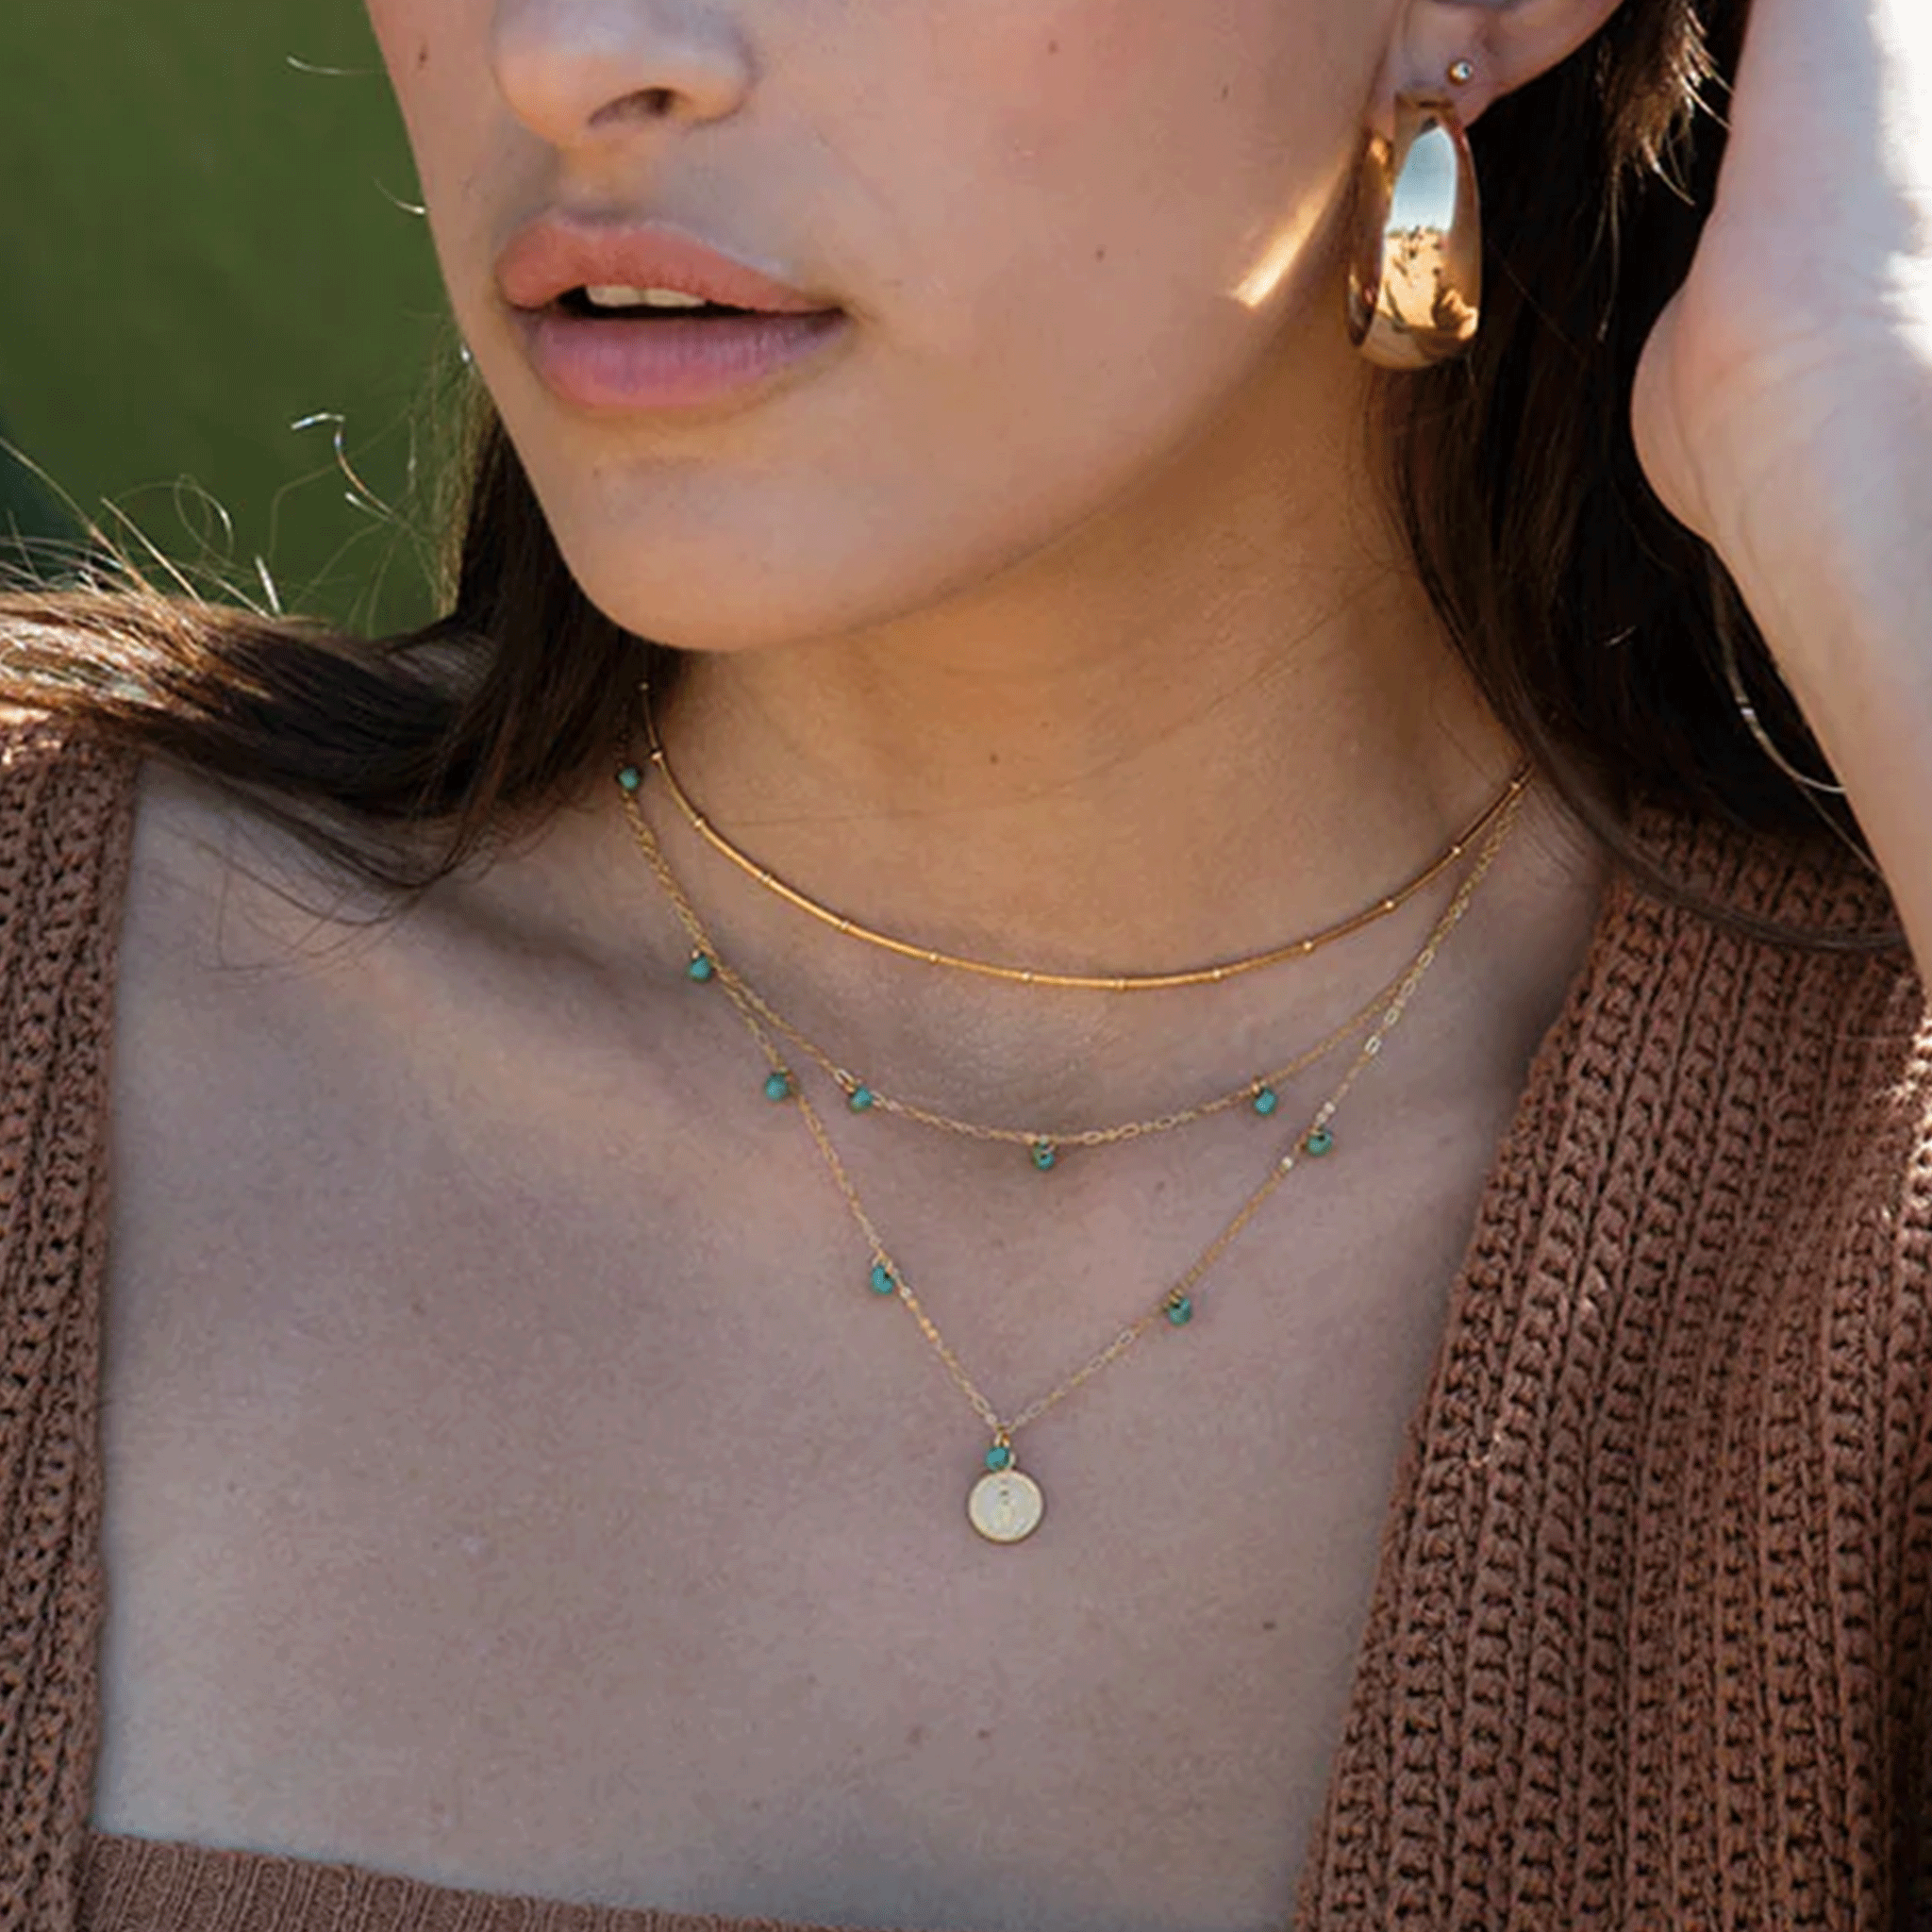 A gold dainty chain necklace with five turquoise beads spaced out along the chain layered here with other necklaces and worn on a model.